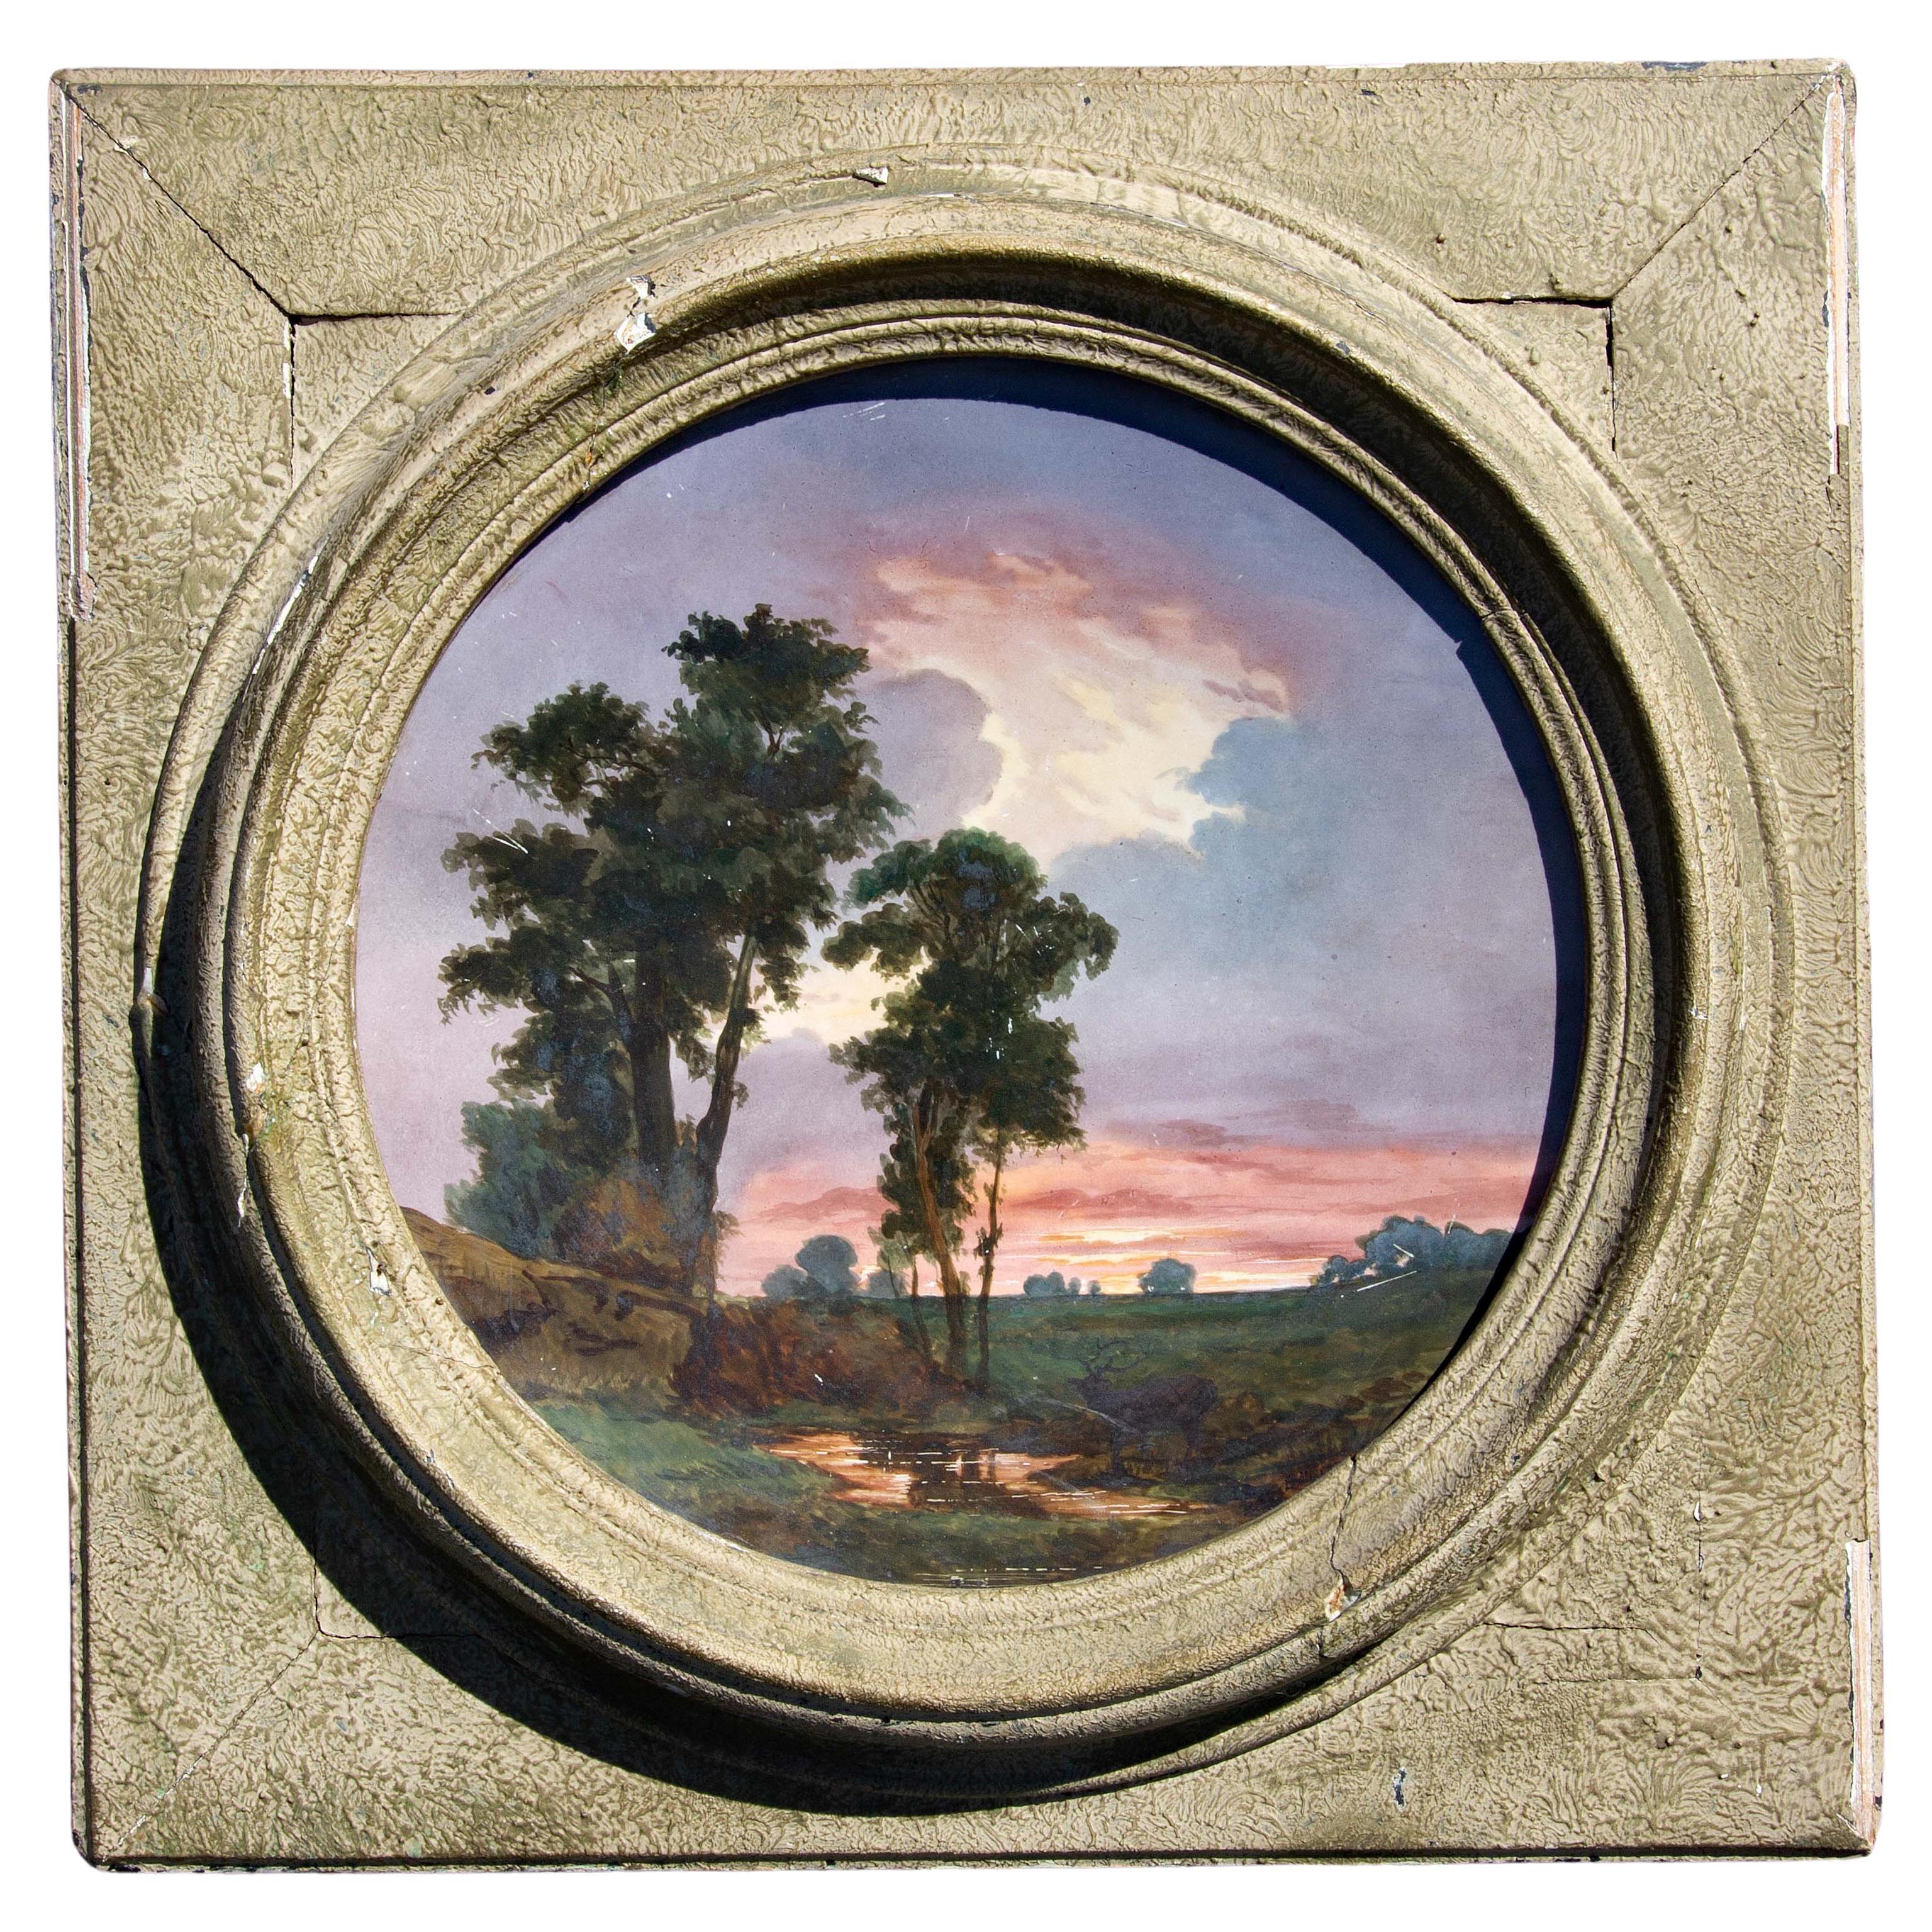 Barbizon Landscape Painting on French Porcelain Charger 19th Century by Millet For Sale